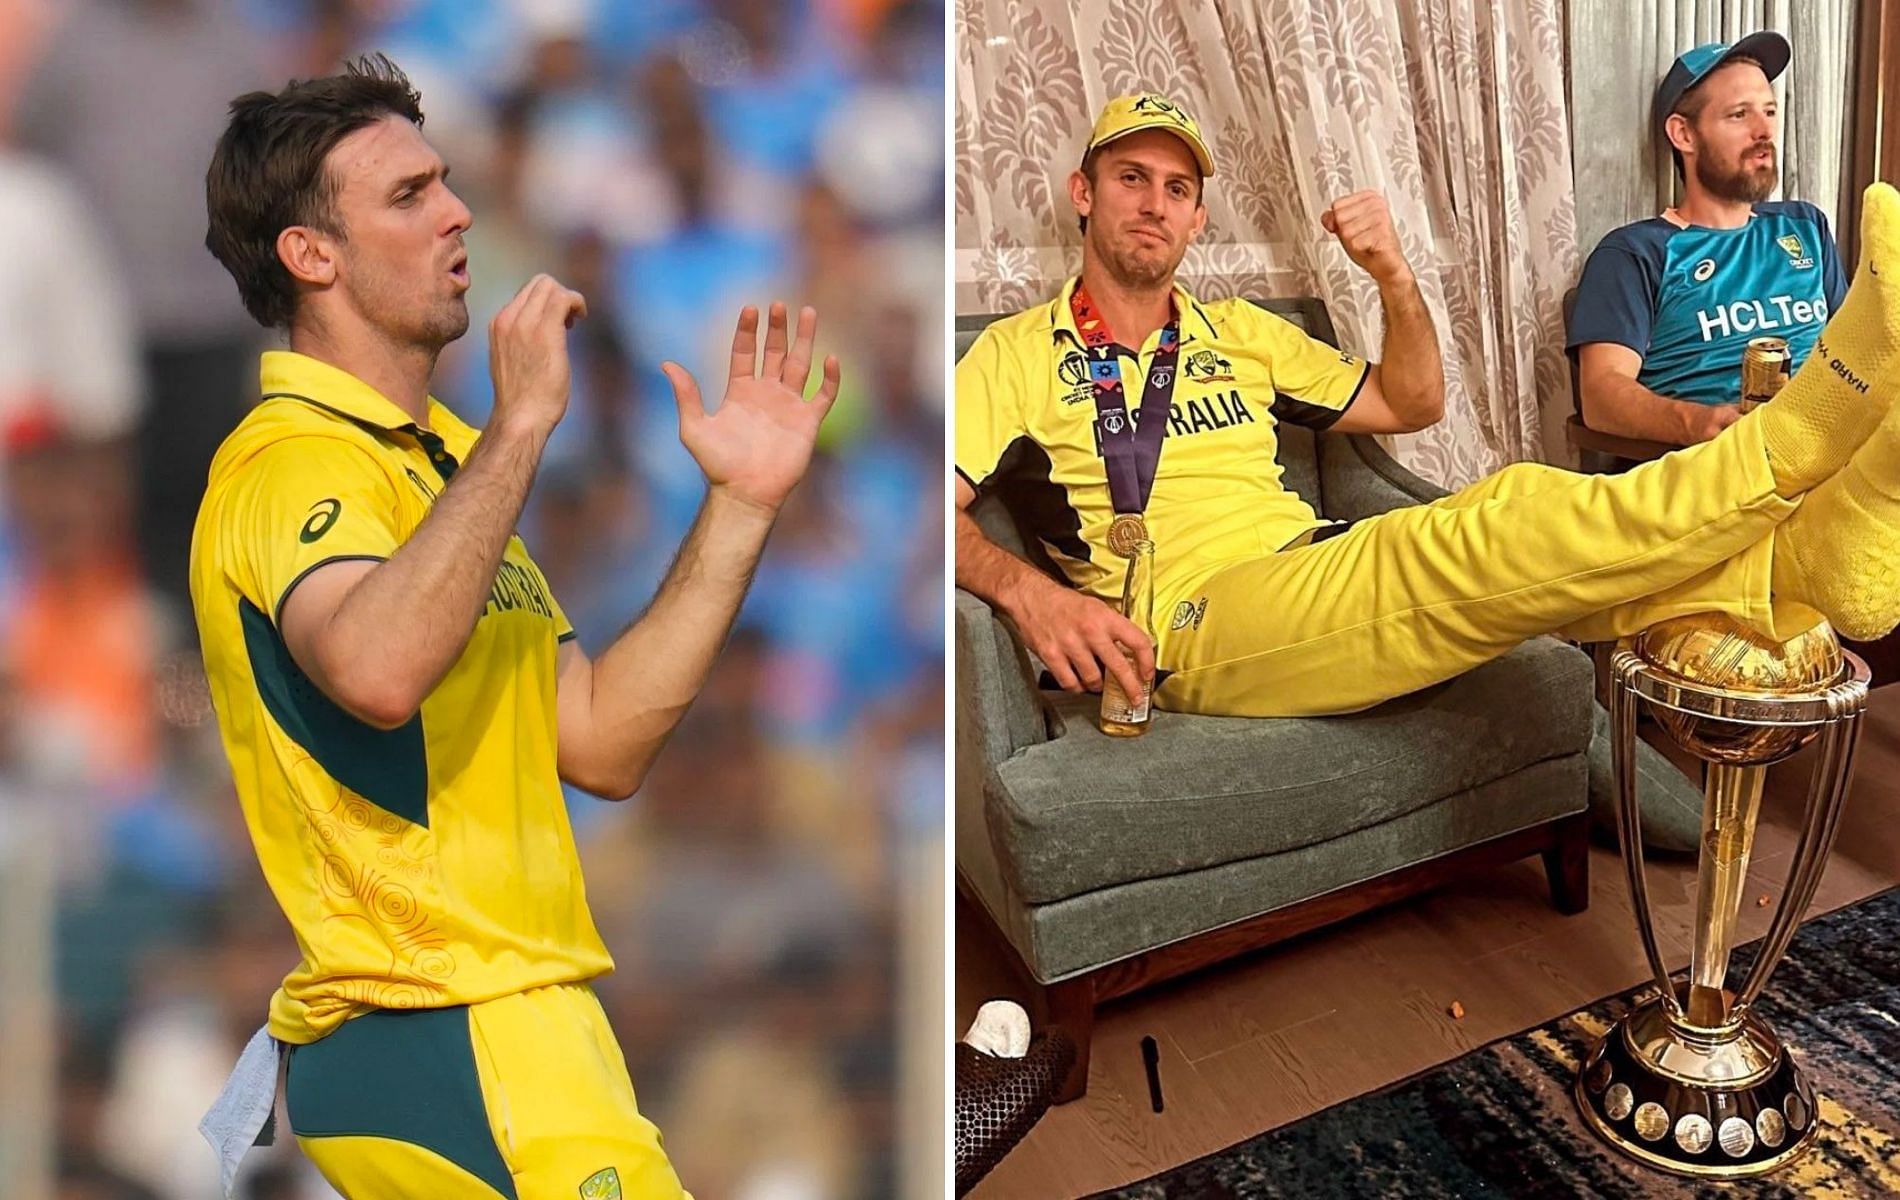 Mitchell Marsh was slammed by many for placing feet on the World Cup trophy. (Pics: AP/X)